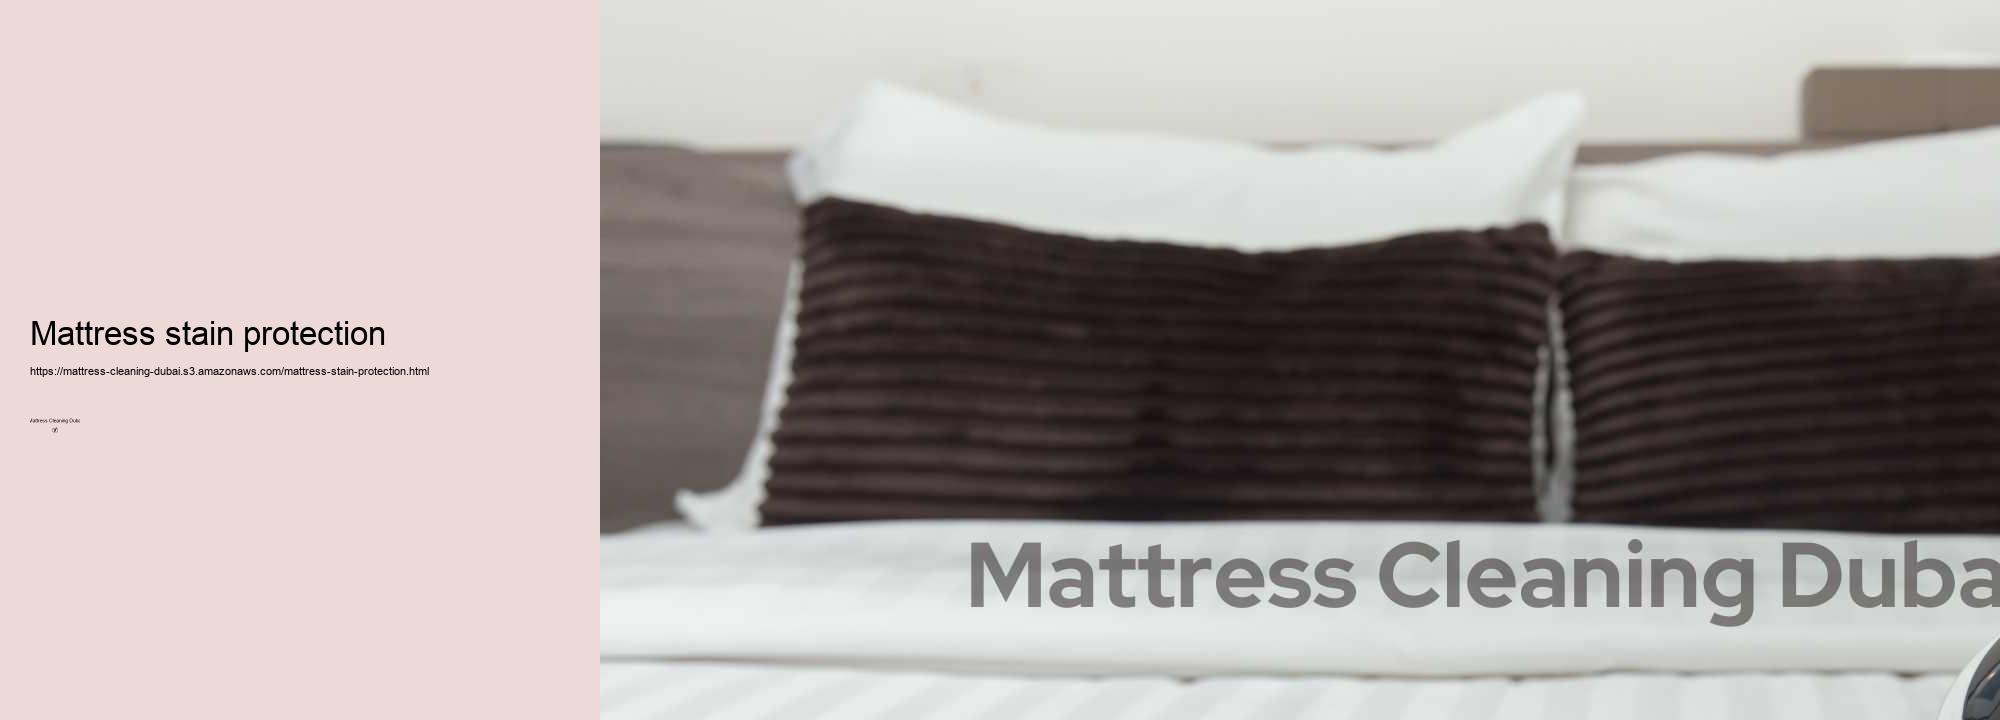 Mattress stain protection